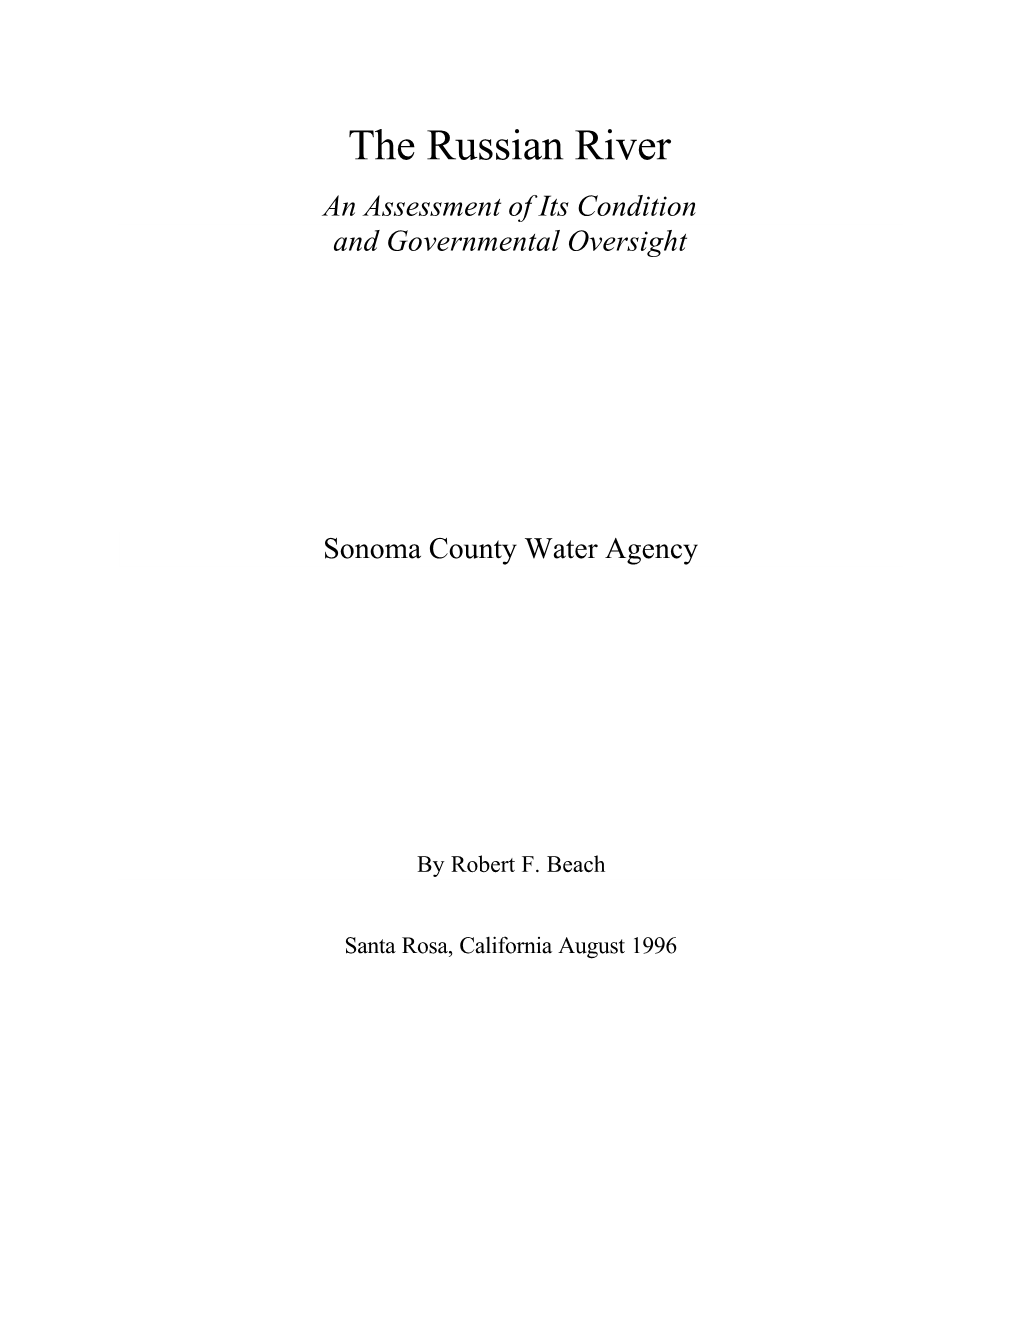 The Russian River an Assessment of Its Condition and Governmental Oversight